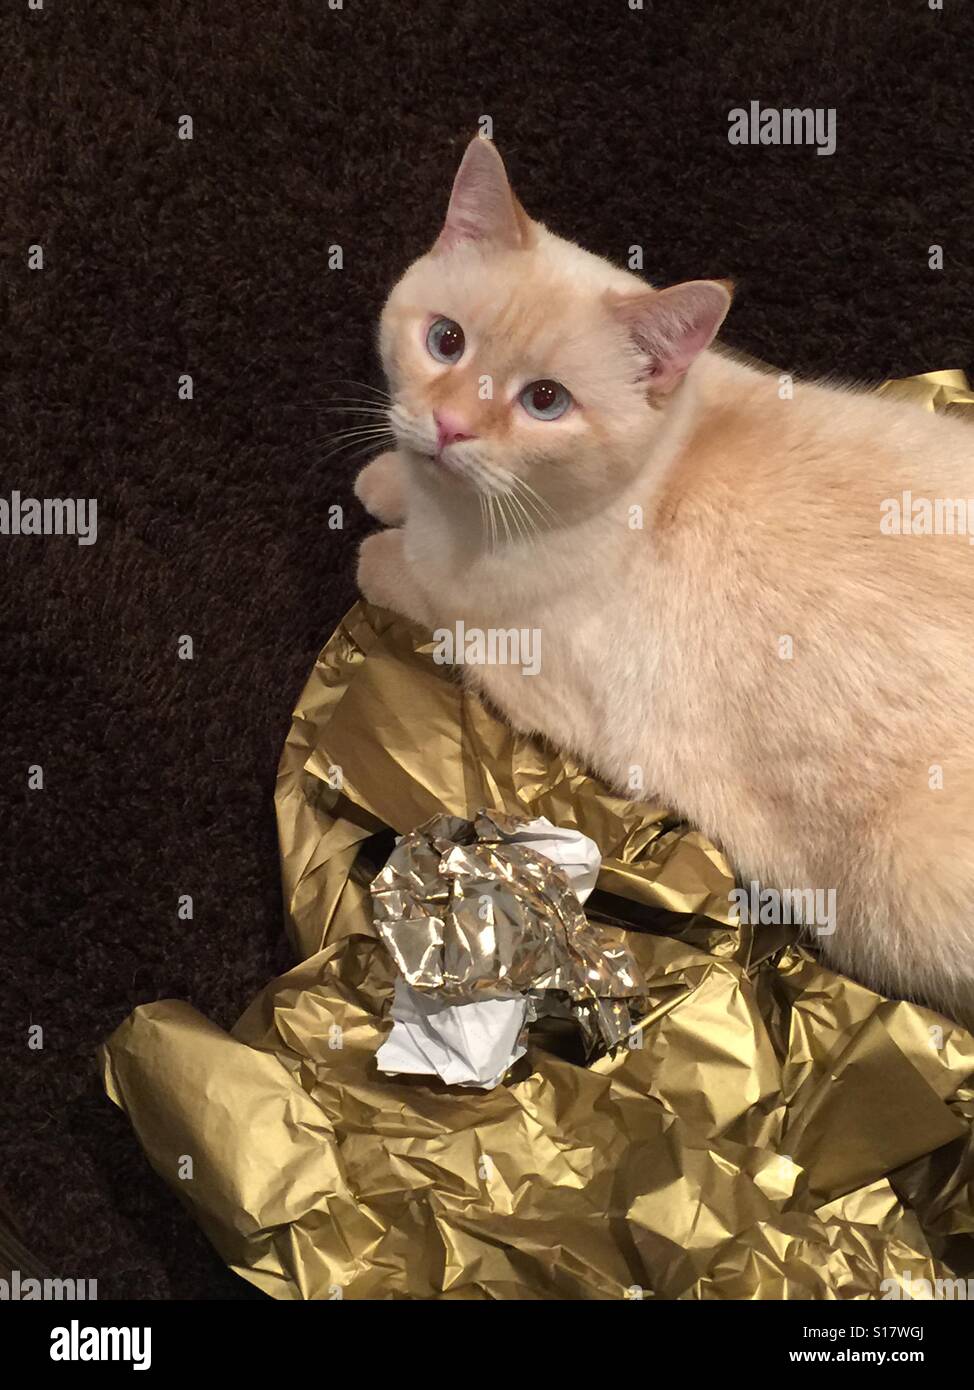 A white flamepoint Siamese cat is lying on gold wrapping paper Stock Photo